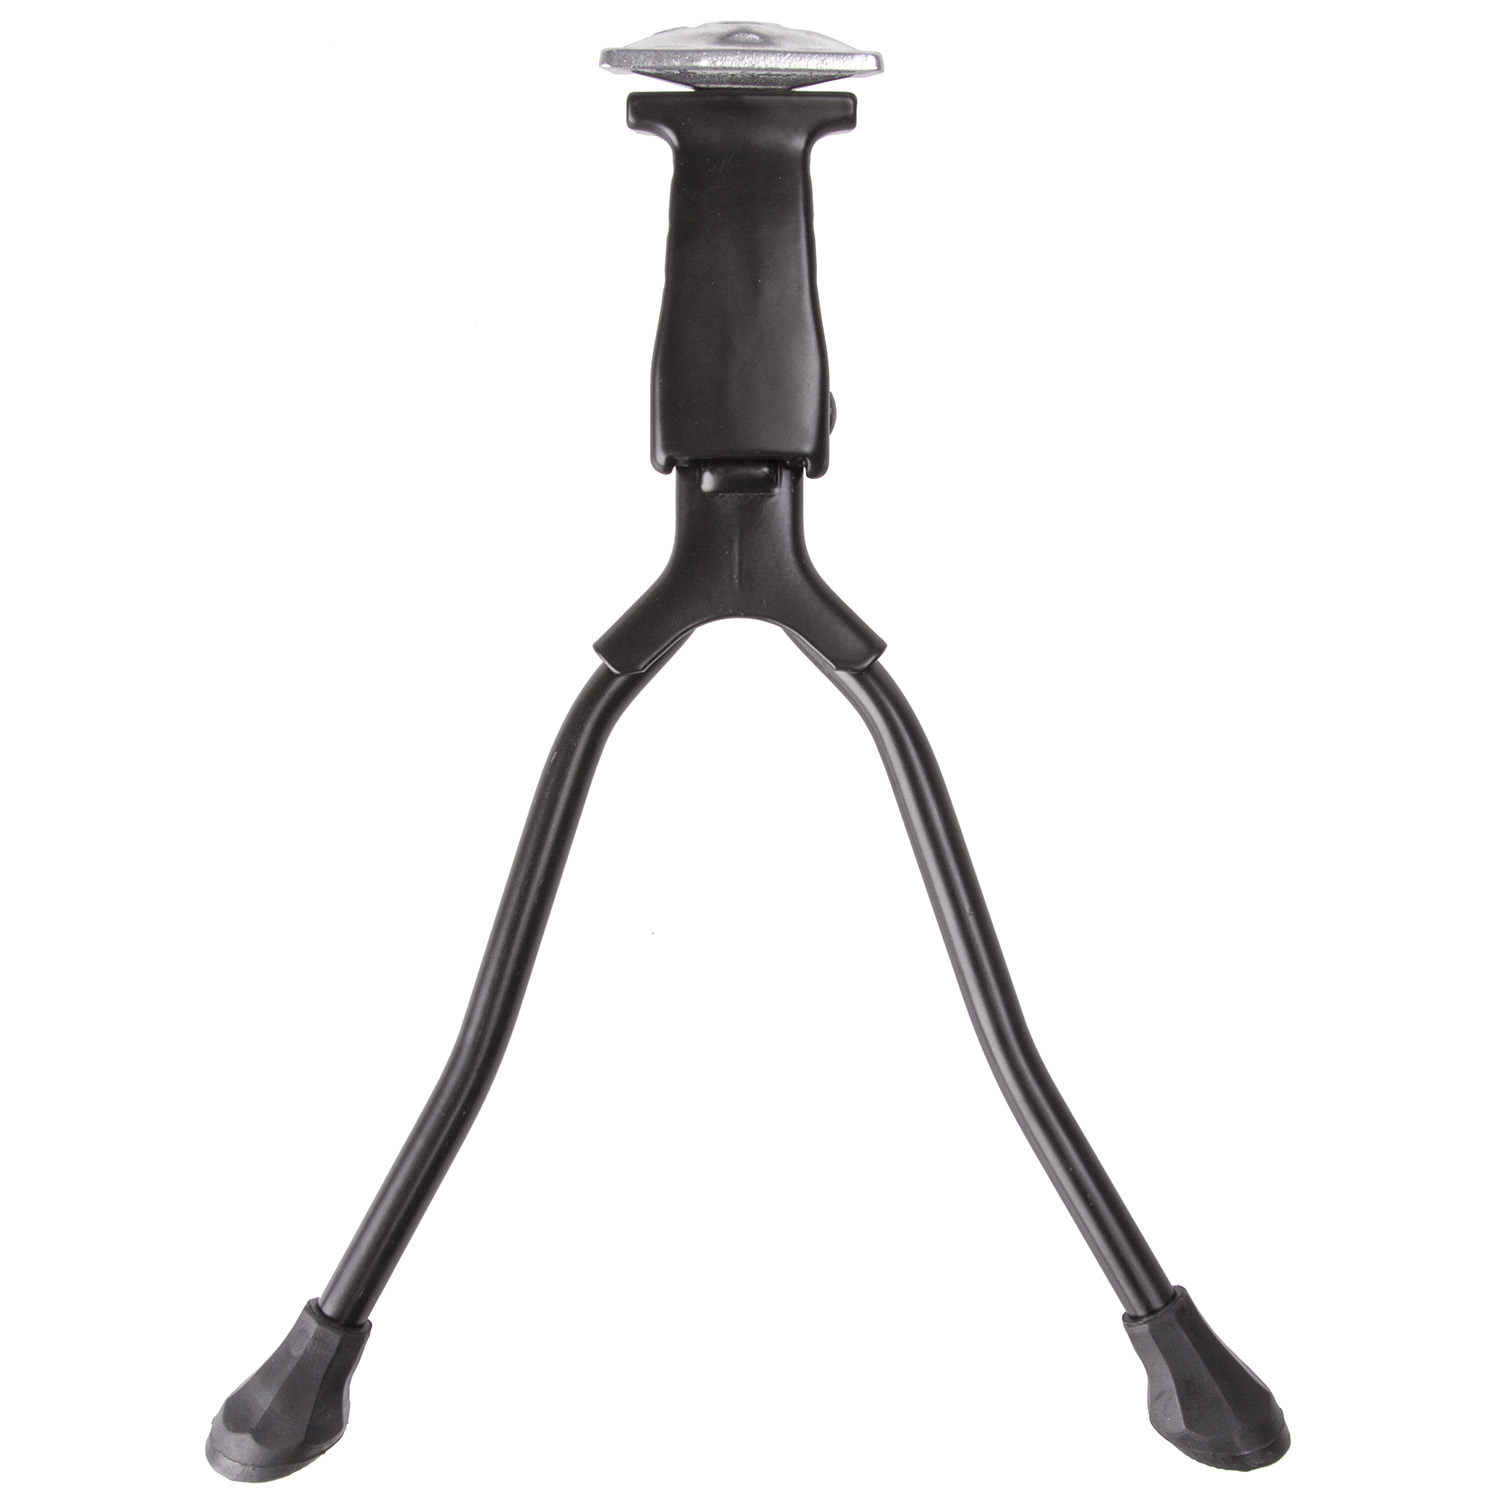 AS26-28 double side stand – AVAILABLE IN SELECTED BIKE SHOPS